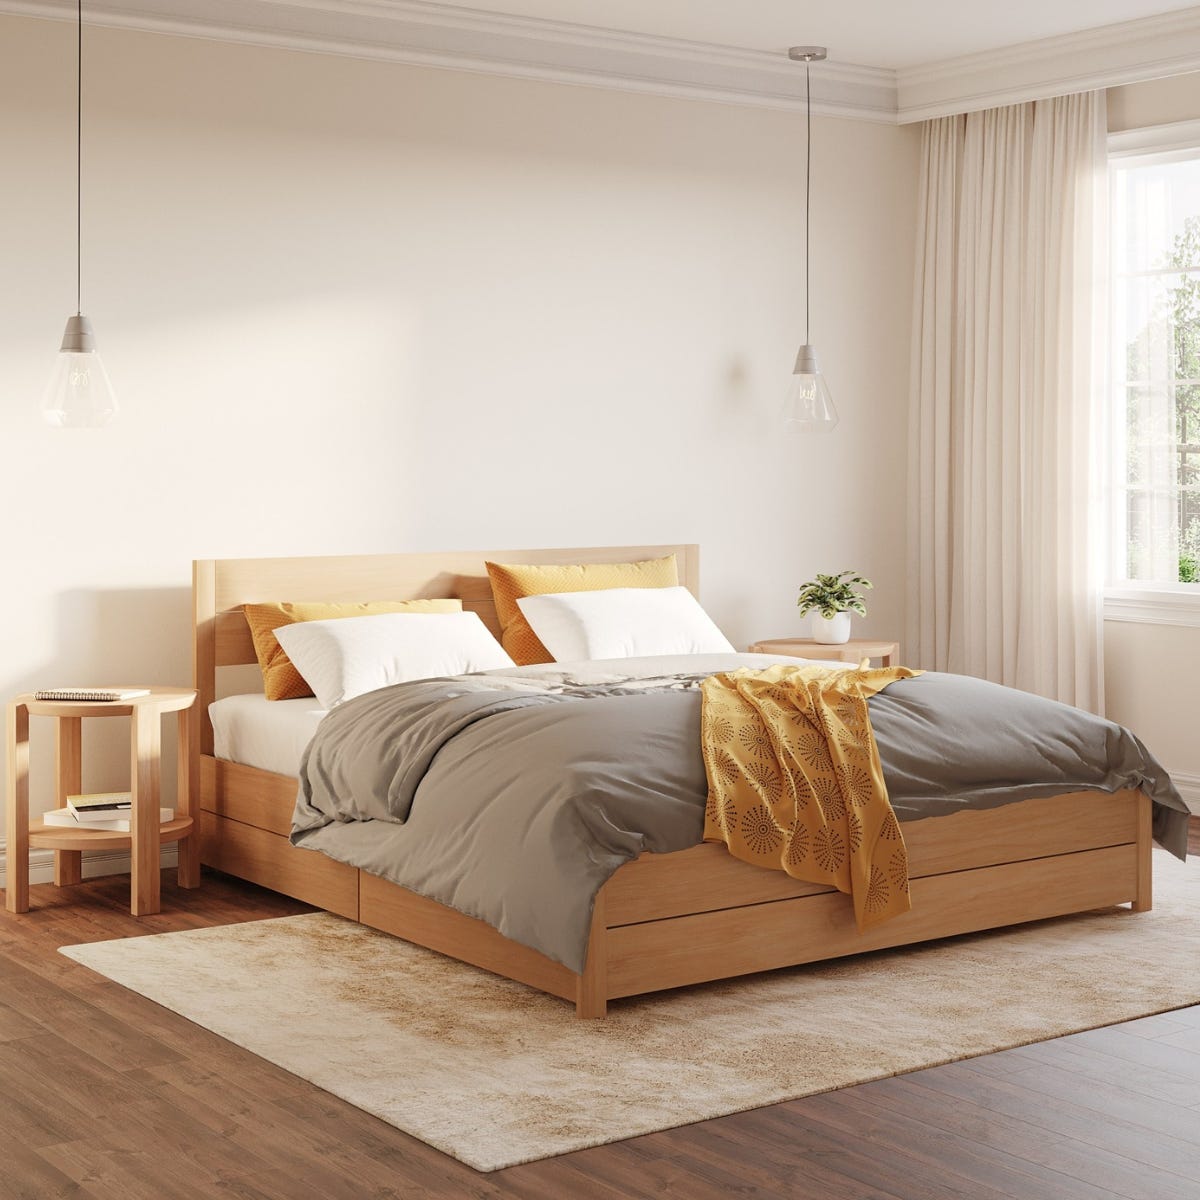 Classic_Wooden_Bed_Influencer_Mood_5